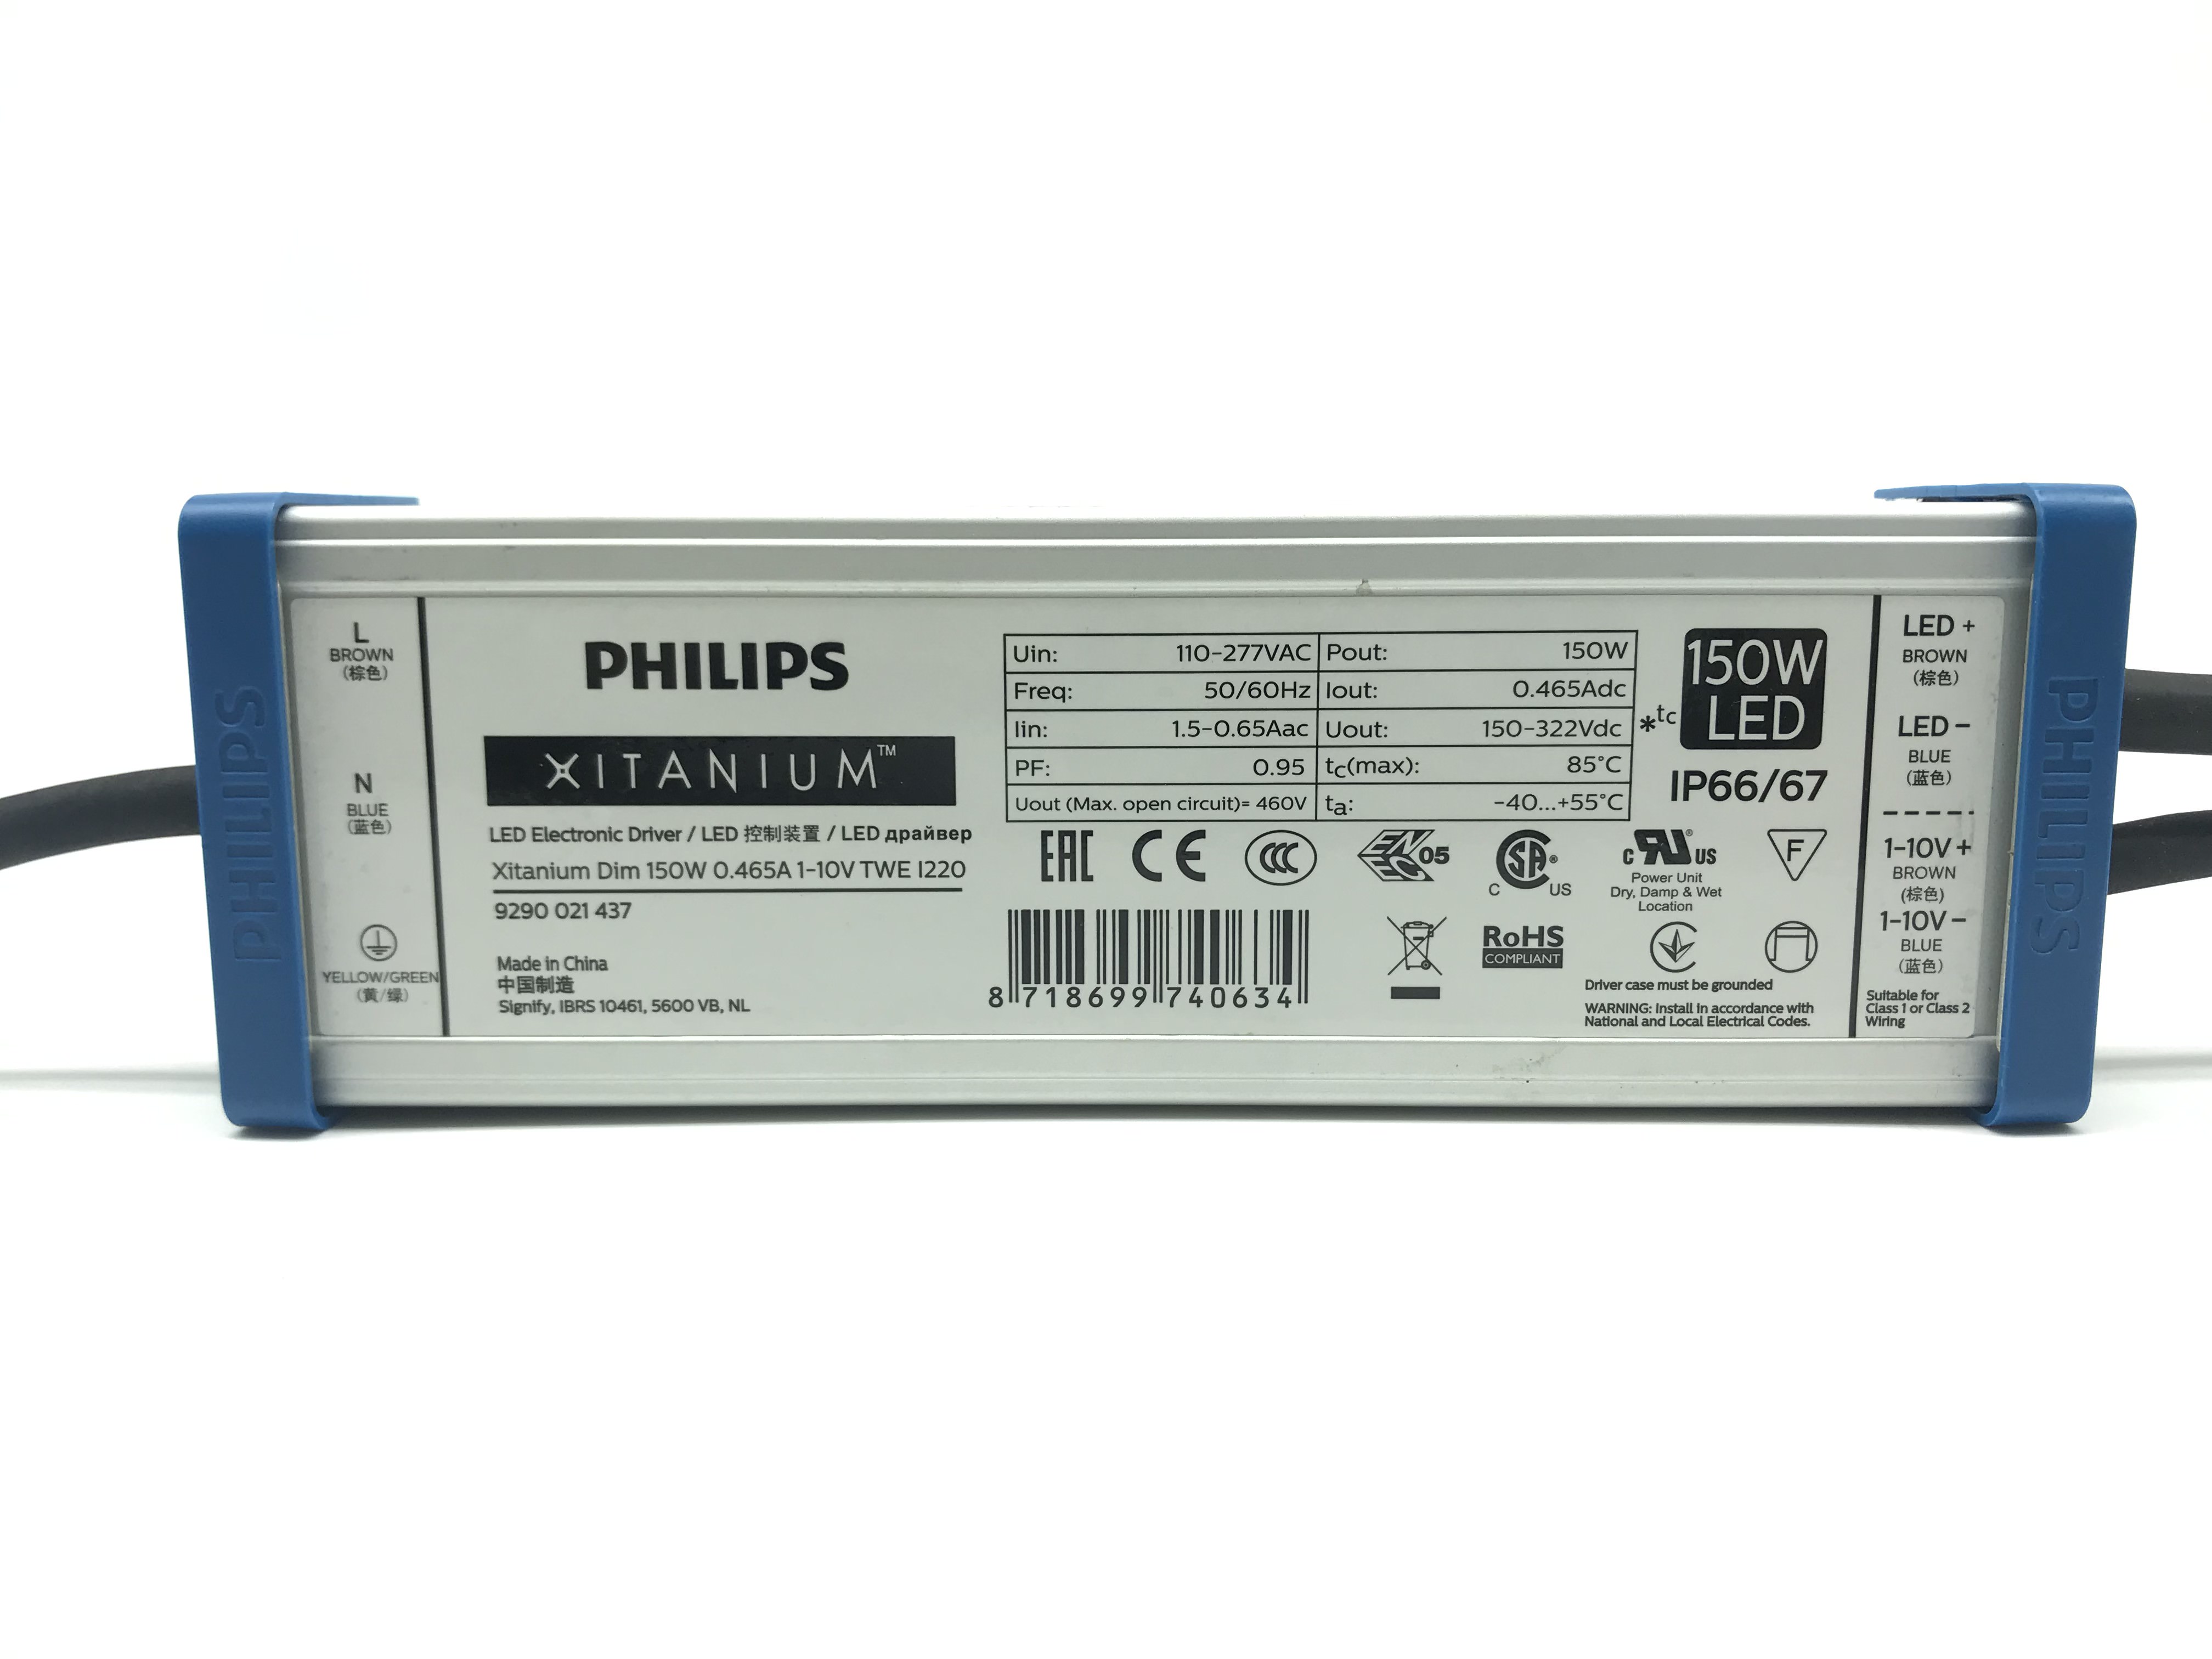 PHILIPS XITANIUM DIMMABLE LED ELECTRONIC BALLAST/DRIVER 150W 0.465A 1-10V  TWE L220 9290021437 PHILIPS LIGHTING Kuala Lumpur (KL), Selangor, Malaysia  Supplier, Supply, Supplies, Distributor | JLL Electrical Sdn Bhd